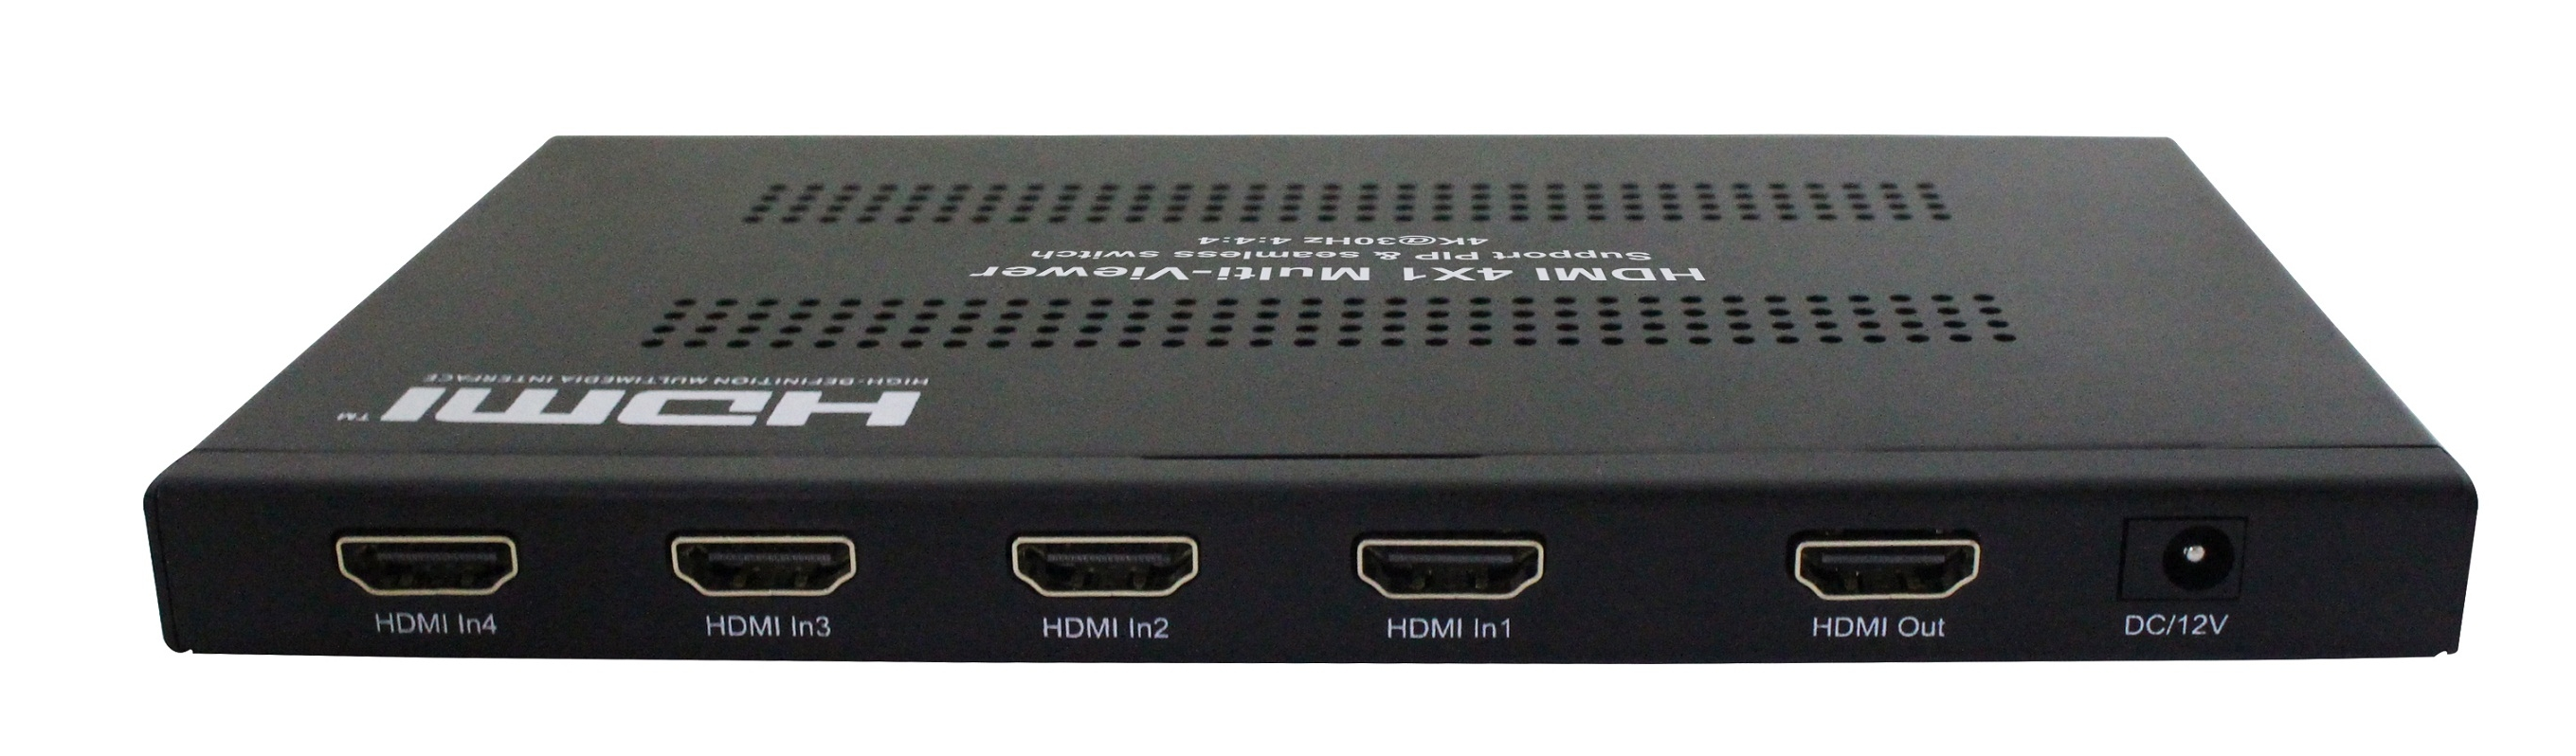 Quad Multi Viewer 4x1 Seamless HDMI Switch With HDMI Output Full HD 1080p  (HD-401MR)